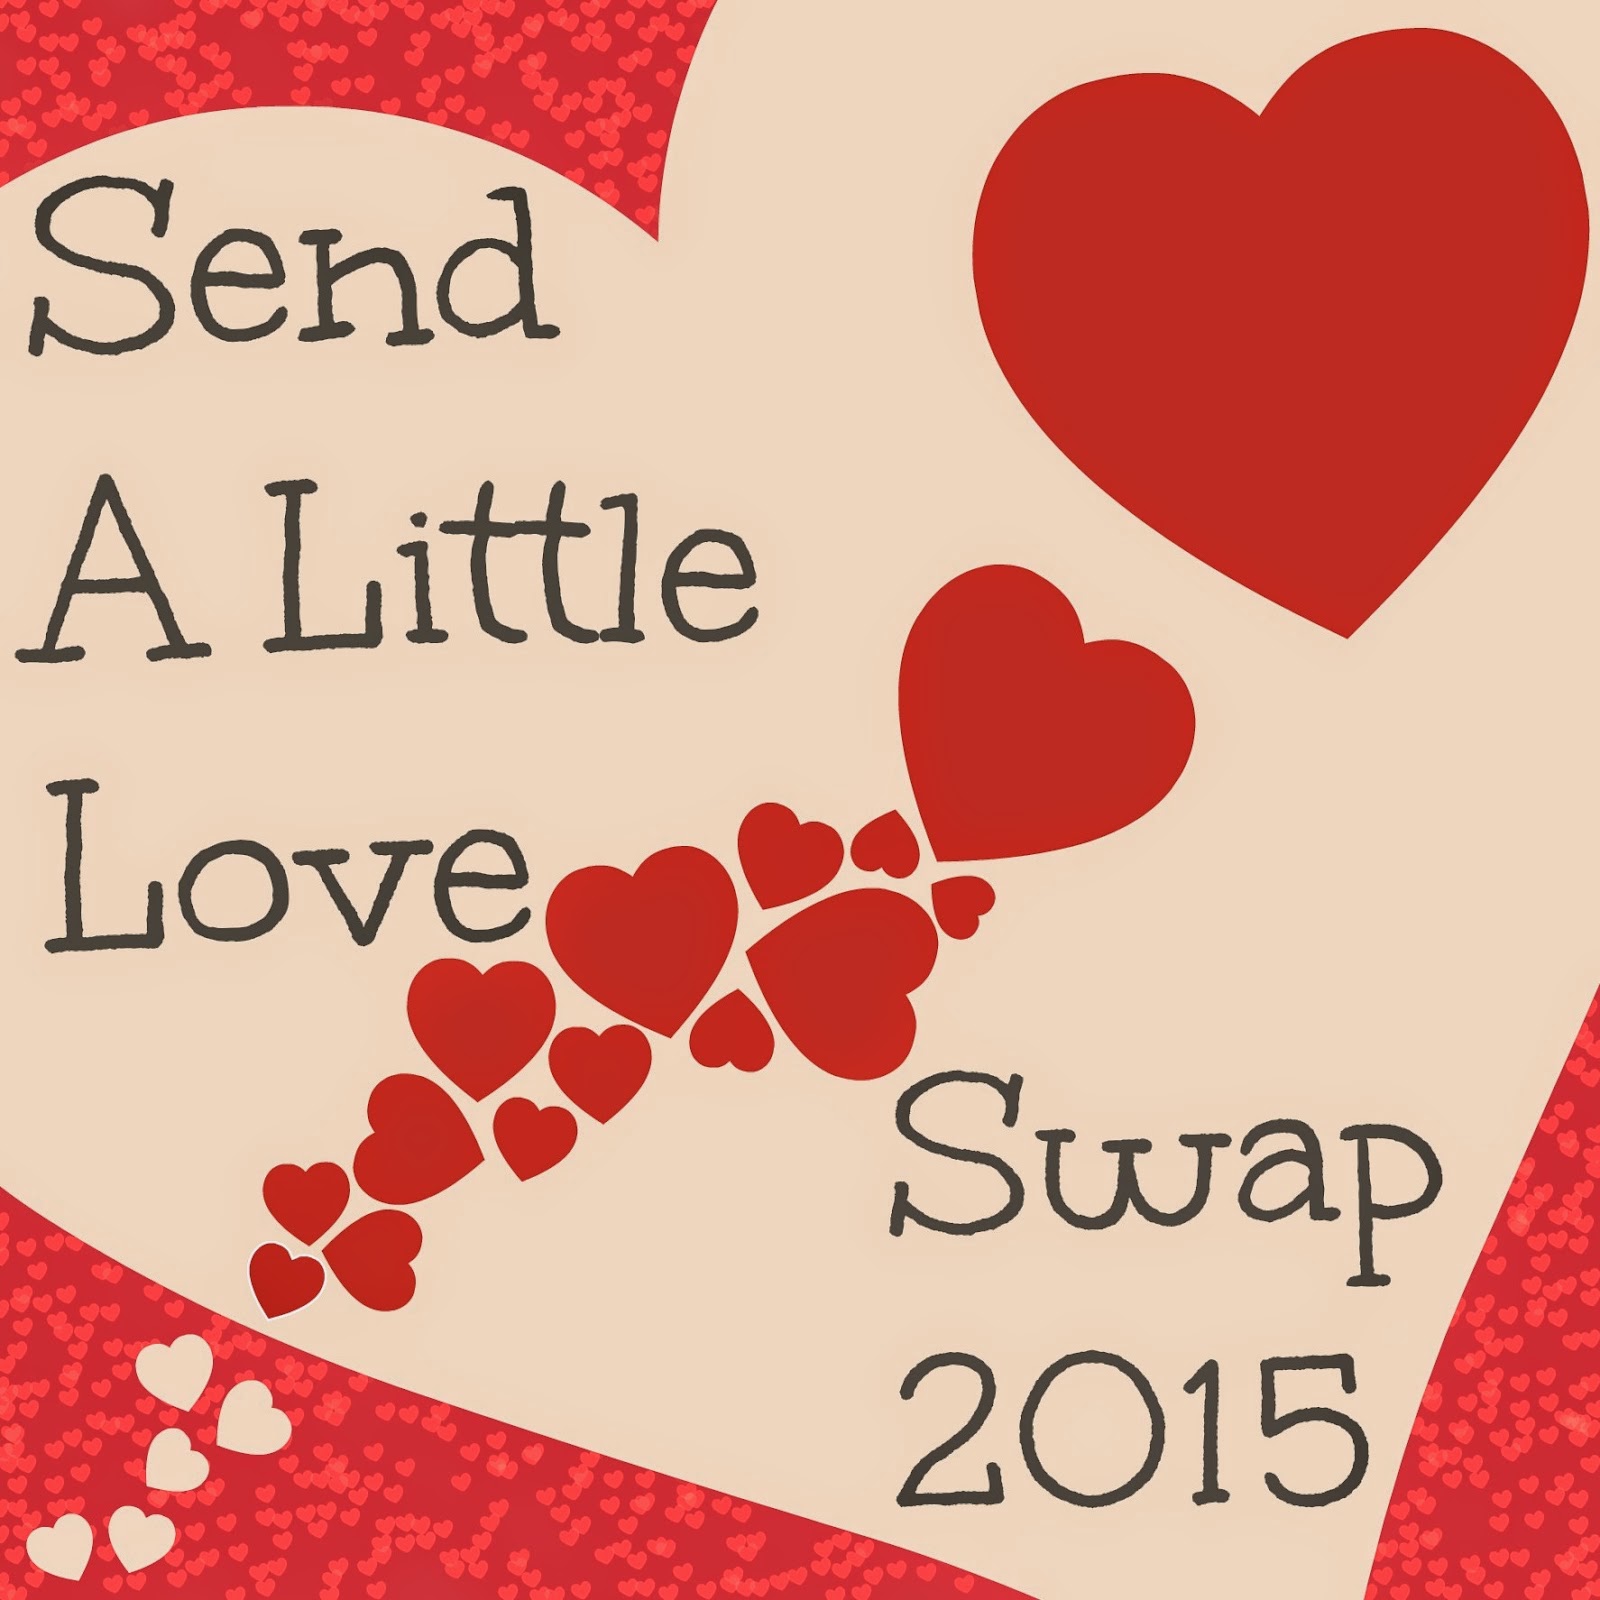 Im joining the Send a Little Love Swap 2015